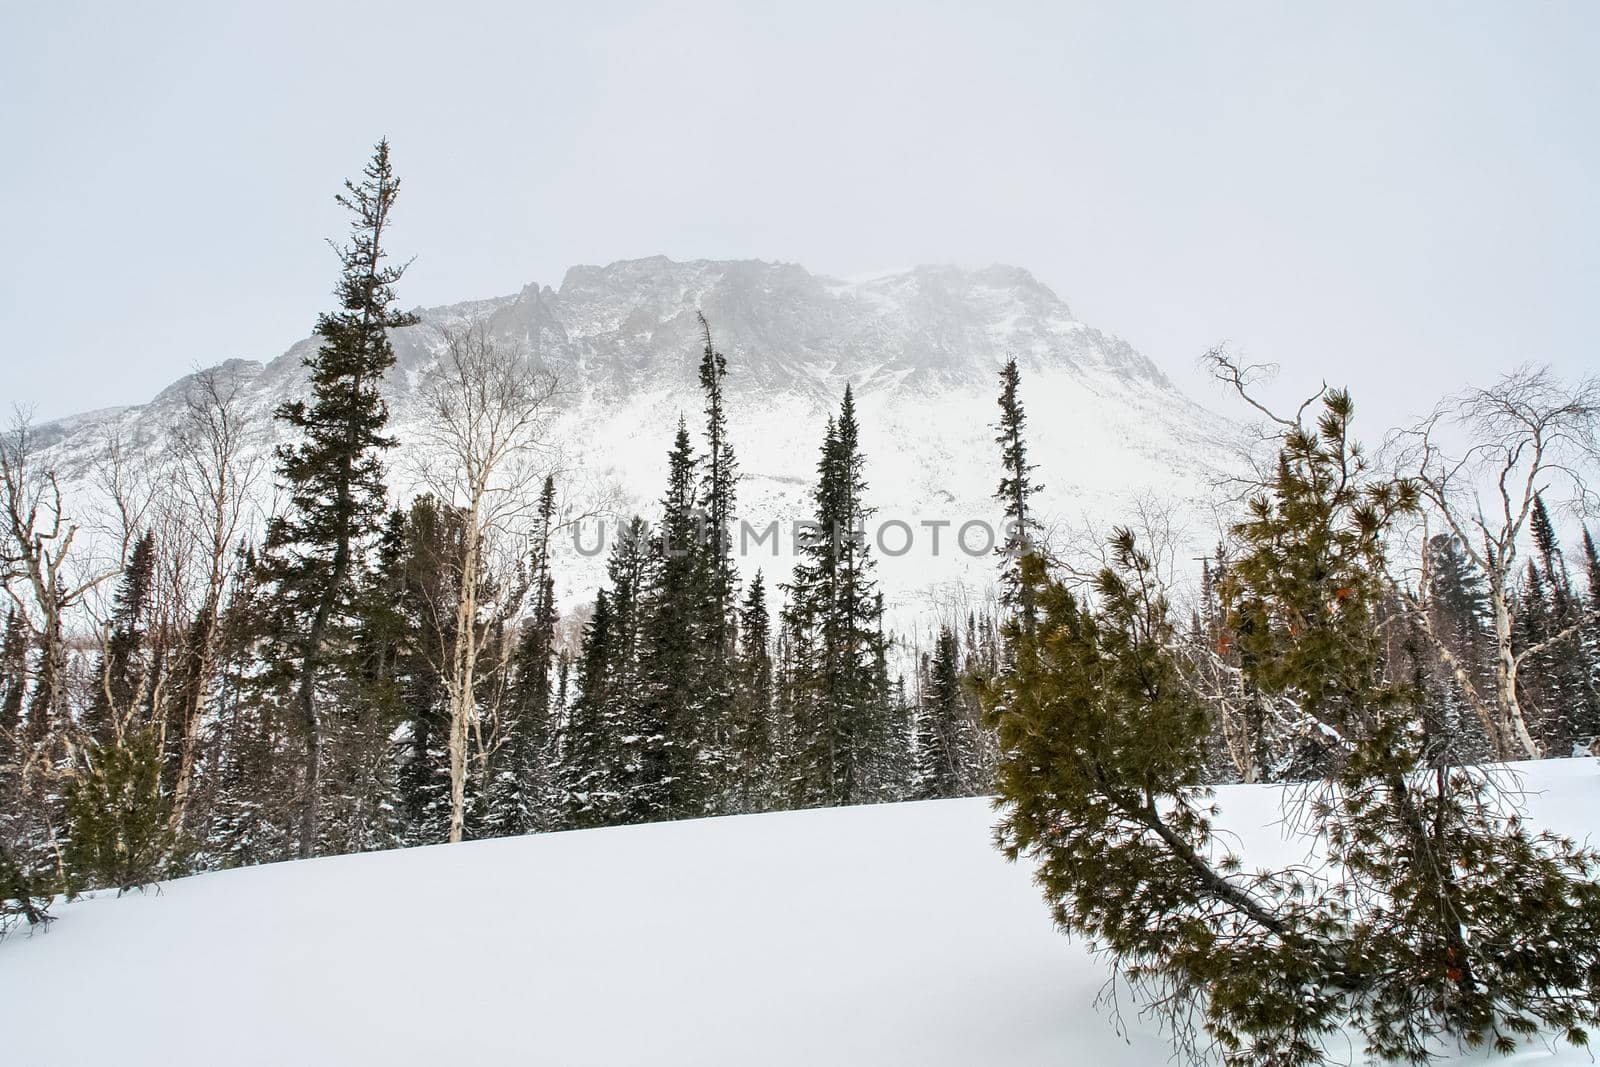 Baikal mountains in winter in snow. Forest in snow-covered mountains.